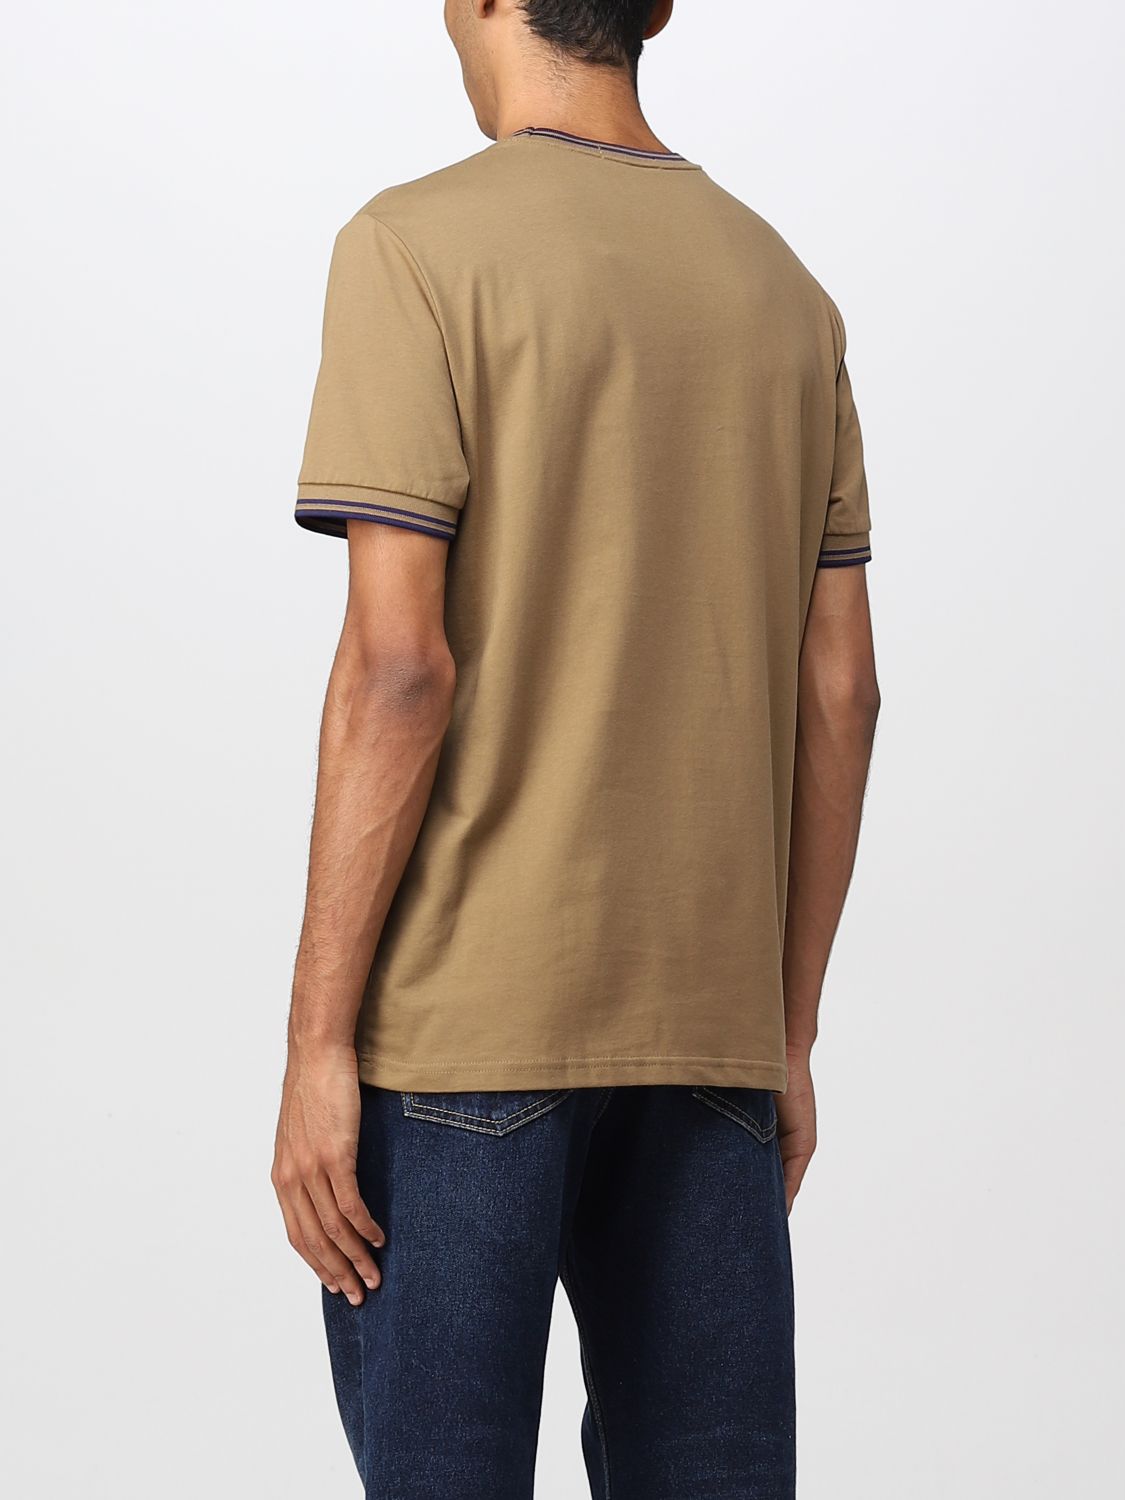 T-shirt Fred Perry: Fred Perry t-shirt for men brown 2